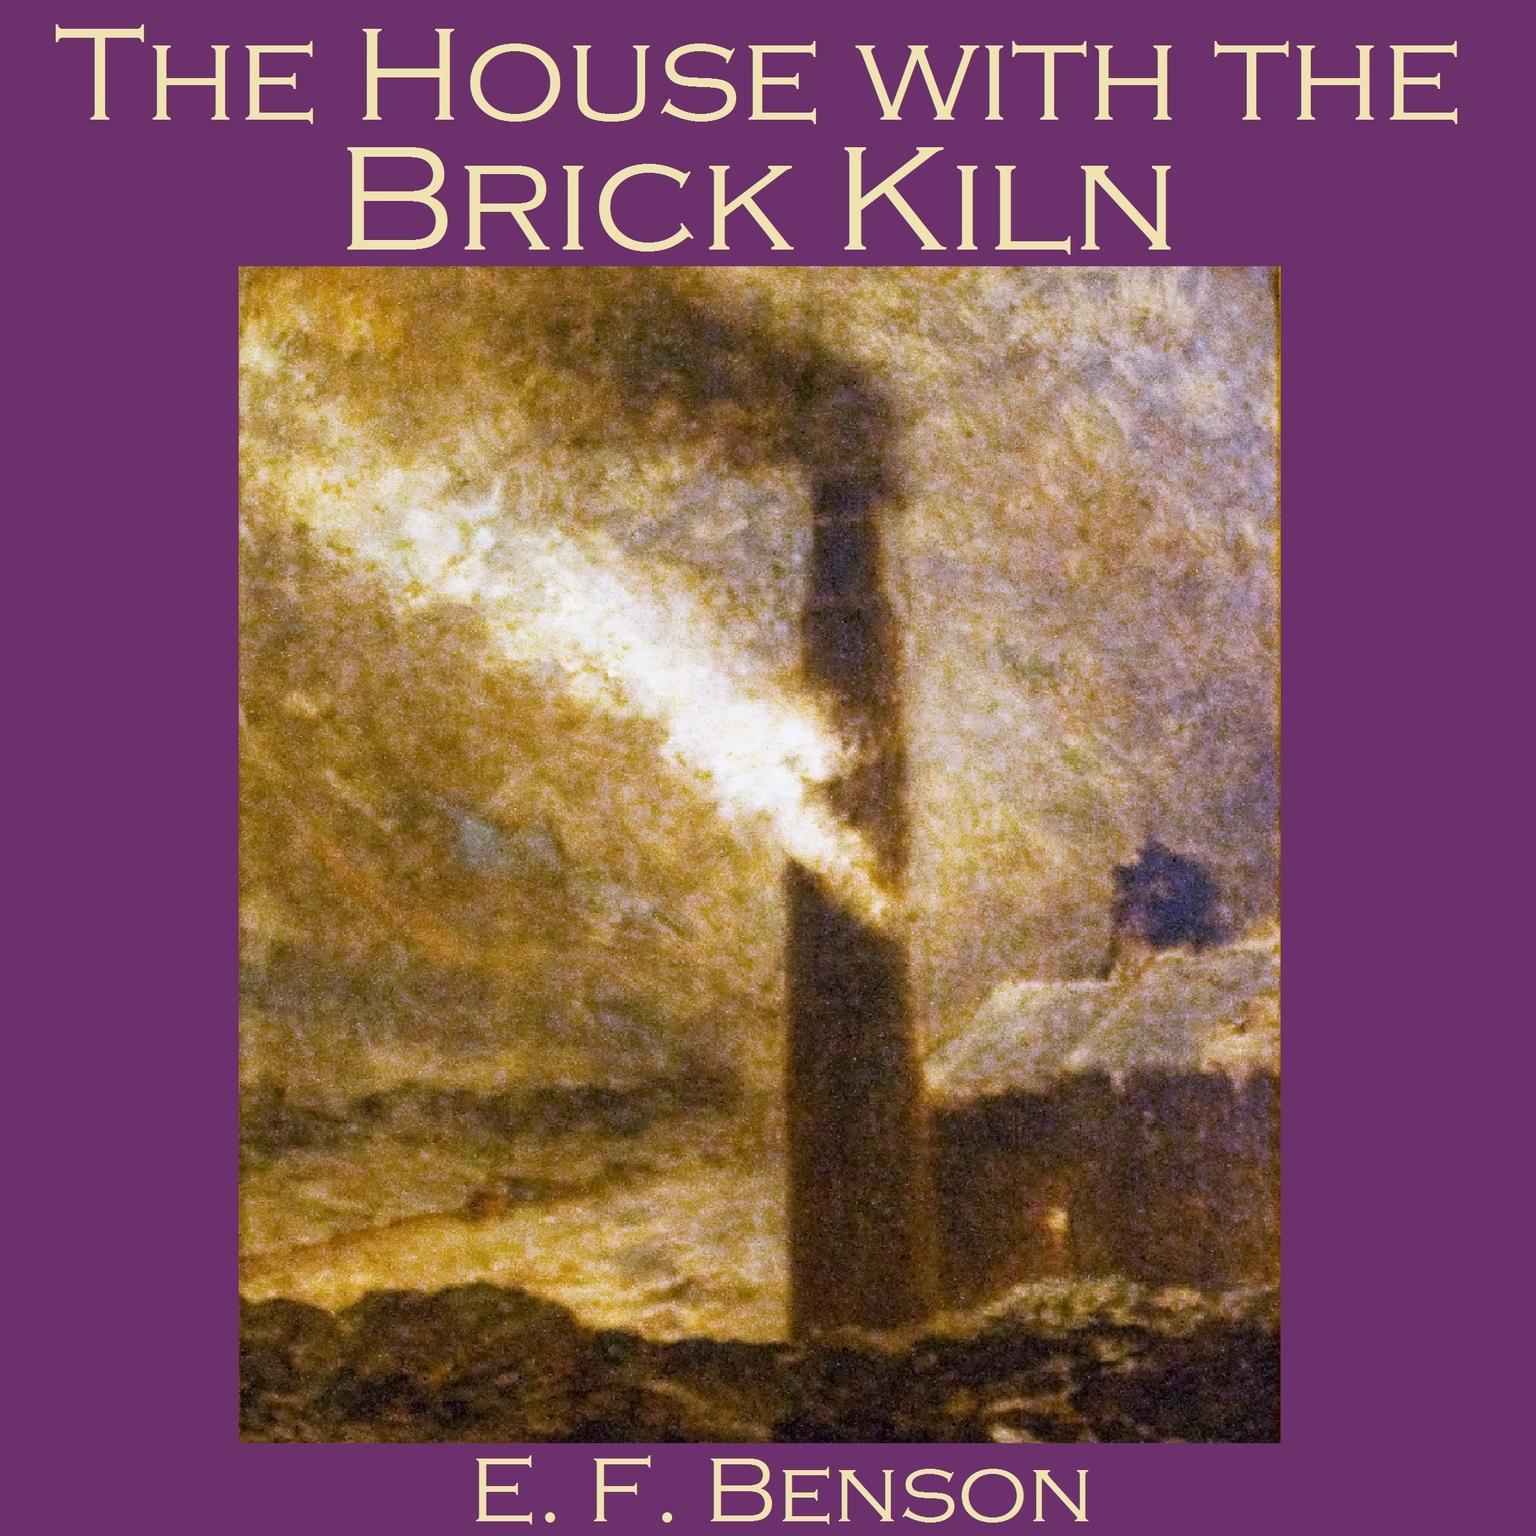 The House with the Brick Kiln Audiobook, by E. F. Benson